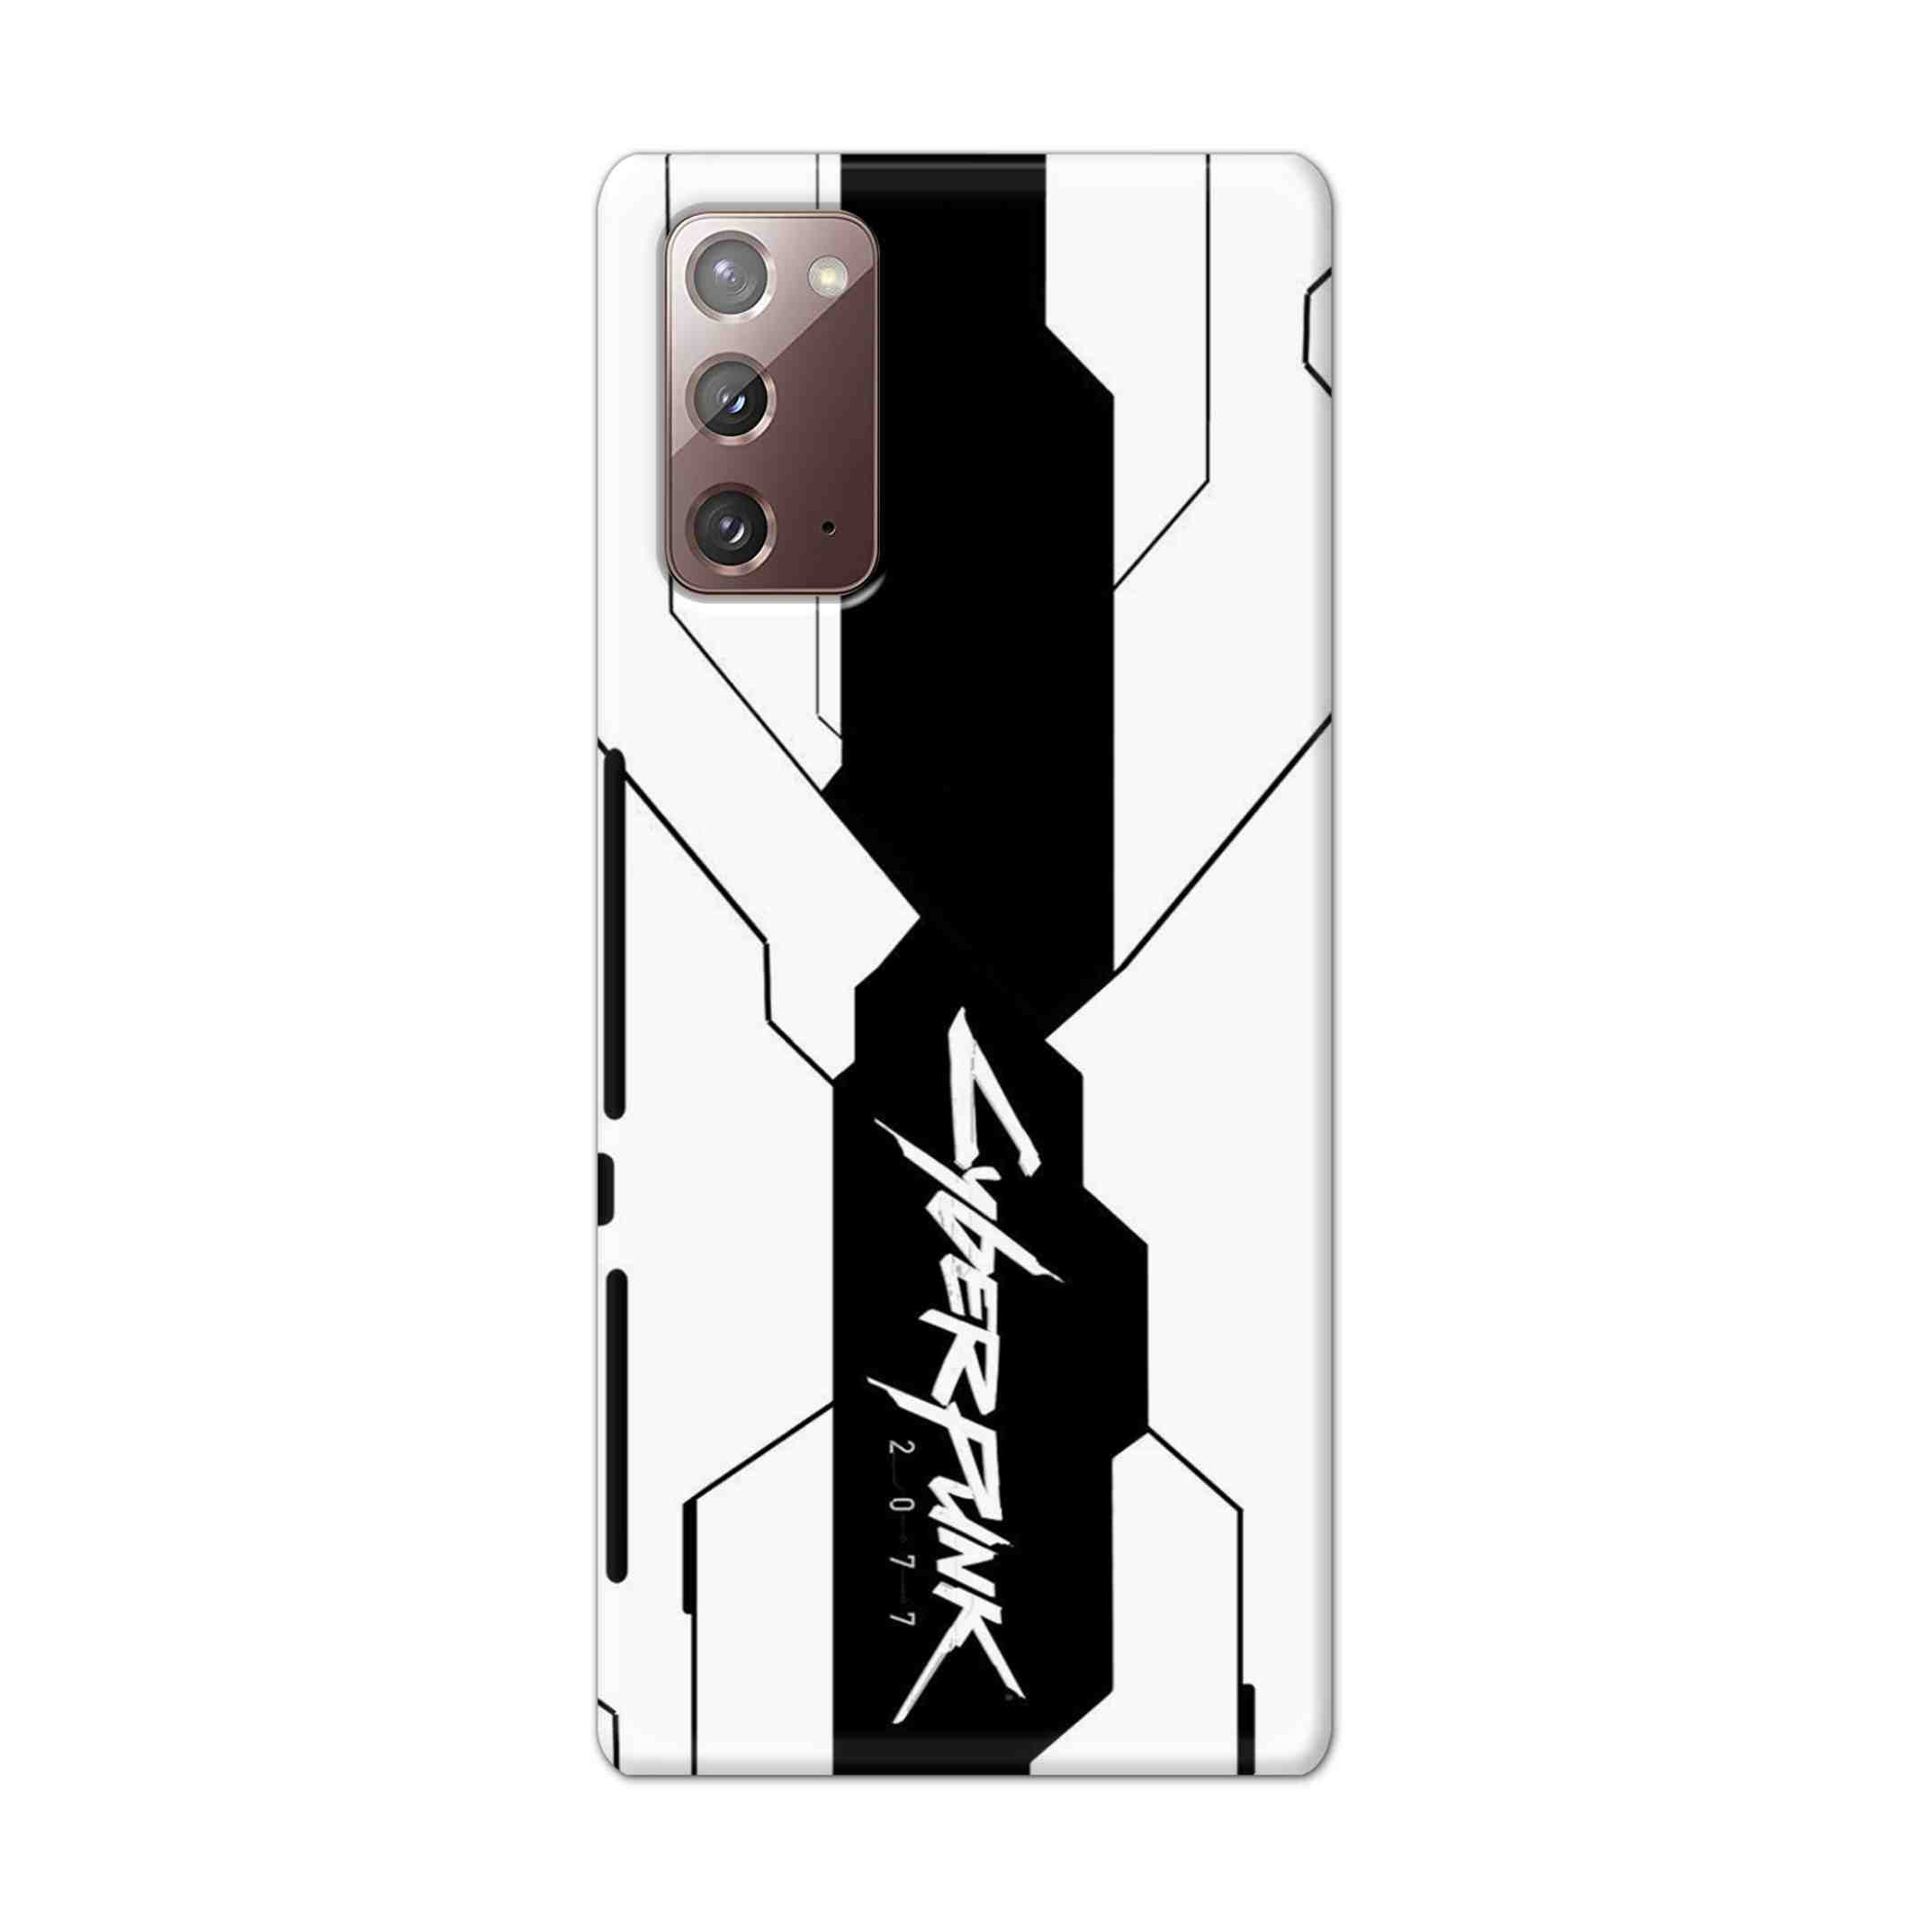 Buy Cyberpunk 2077 Hard Back Mobile Phone Case Cover For Samsung Galaxy Note 20 Online